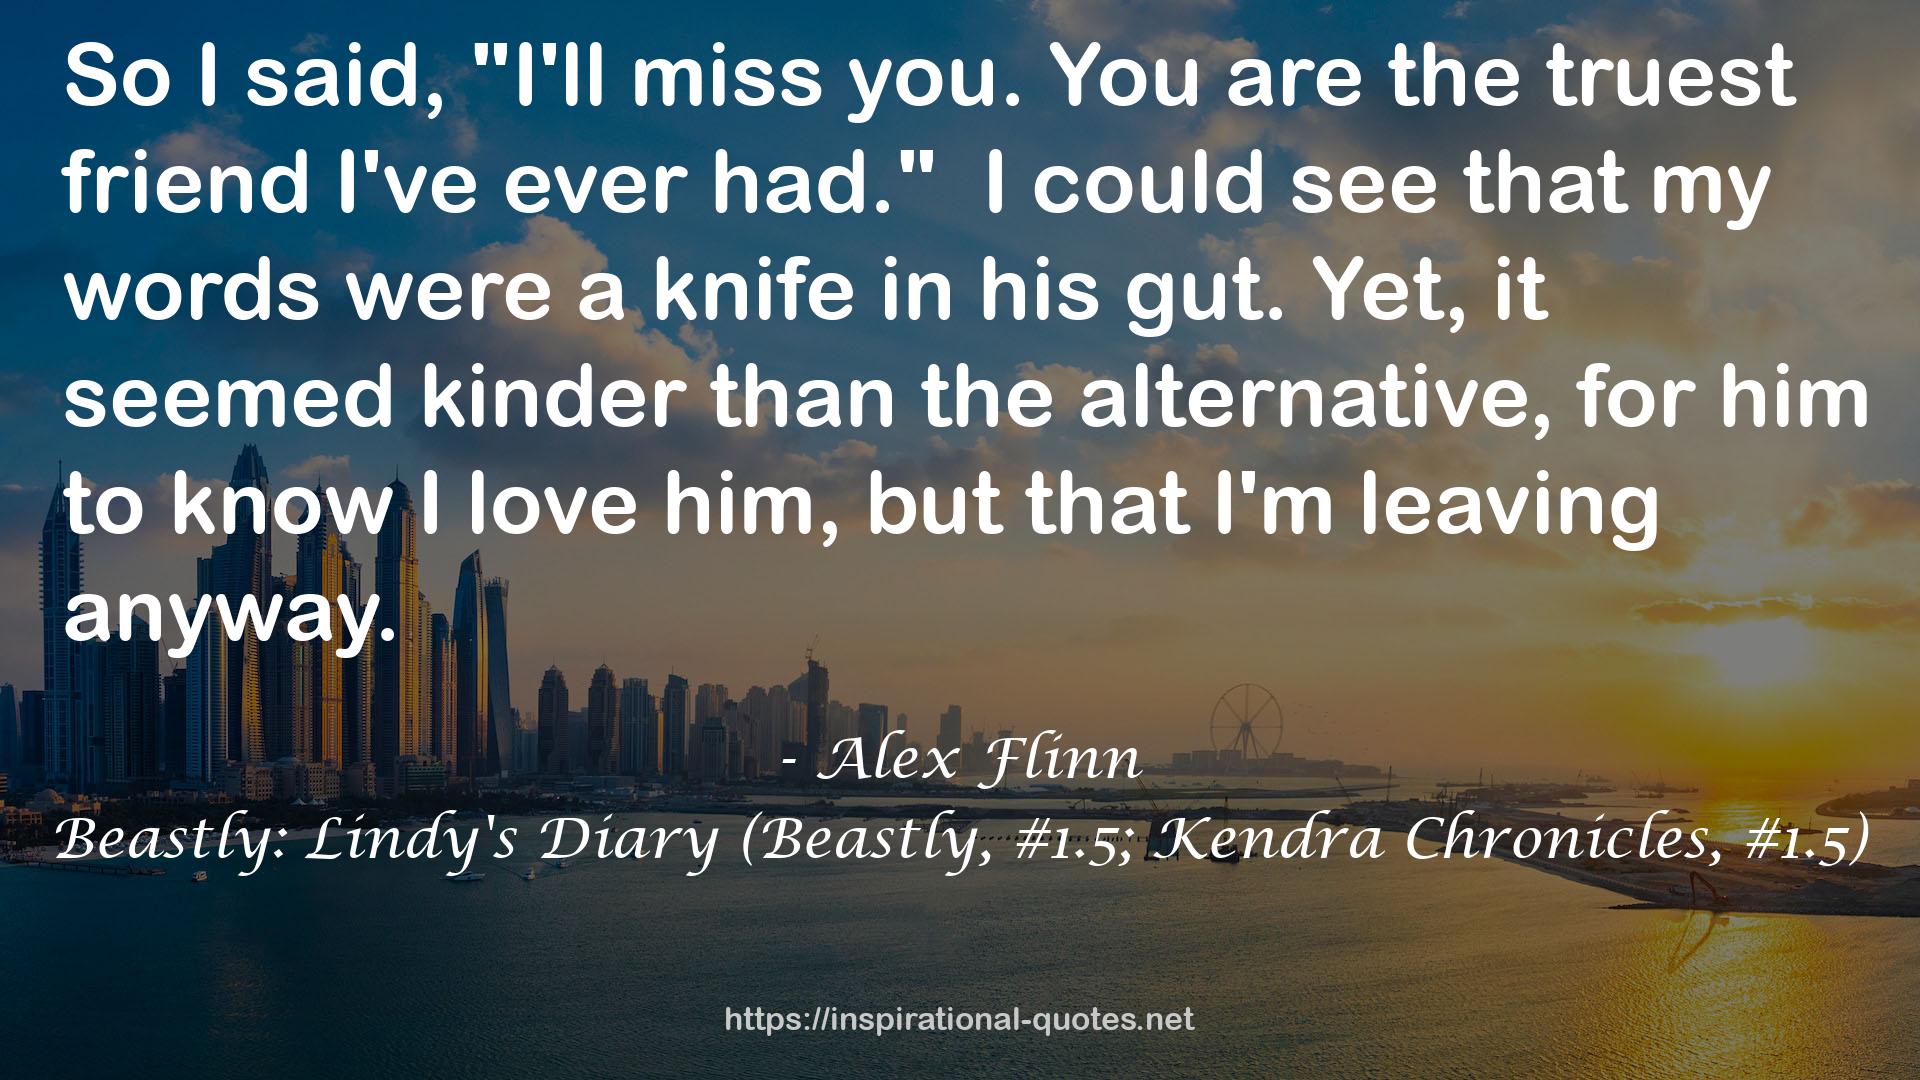 Beastly: Lindy's Diary (Beastly, #1.5; Kendra Chronicles, #1.5) QUOTES